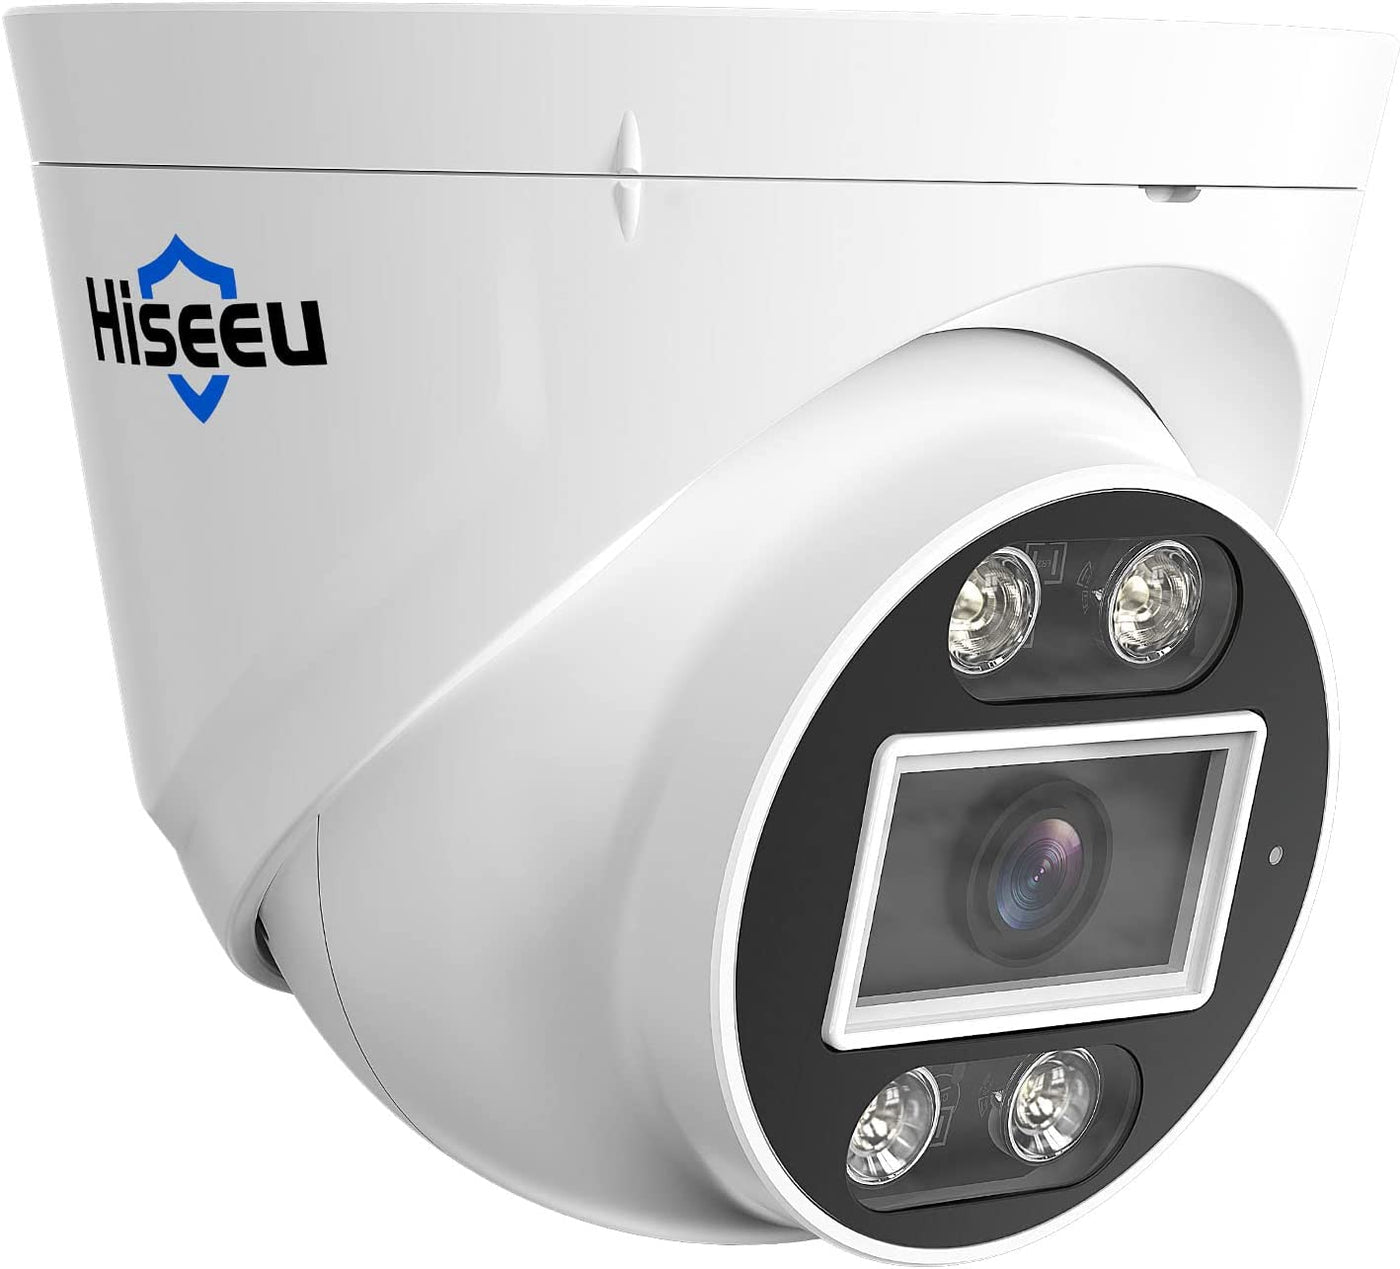 Hiseeu [2 Way Audio] 5MP IP PoE Security Camera, Security Camera Outdoor&Indoor, IP 67 Waterproof, Night Vision, Human/Vehicle Detect Compatible PoE Security Camera System for 24/7 Record